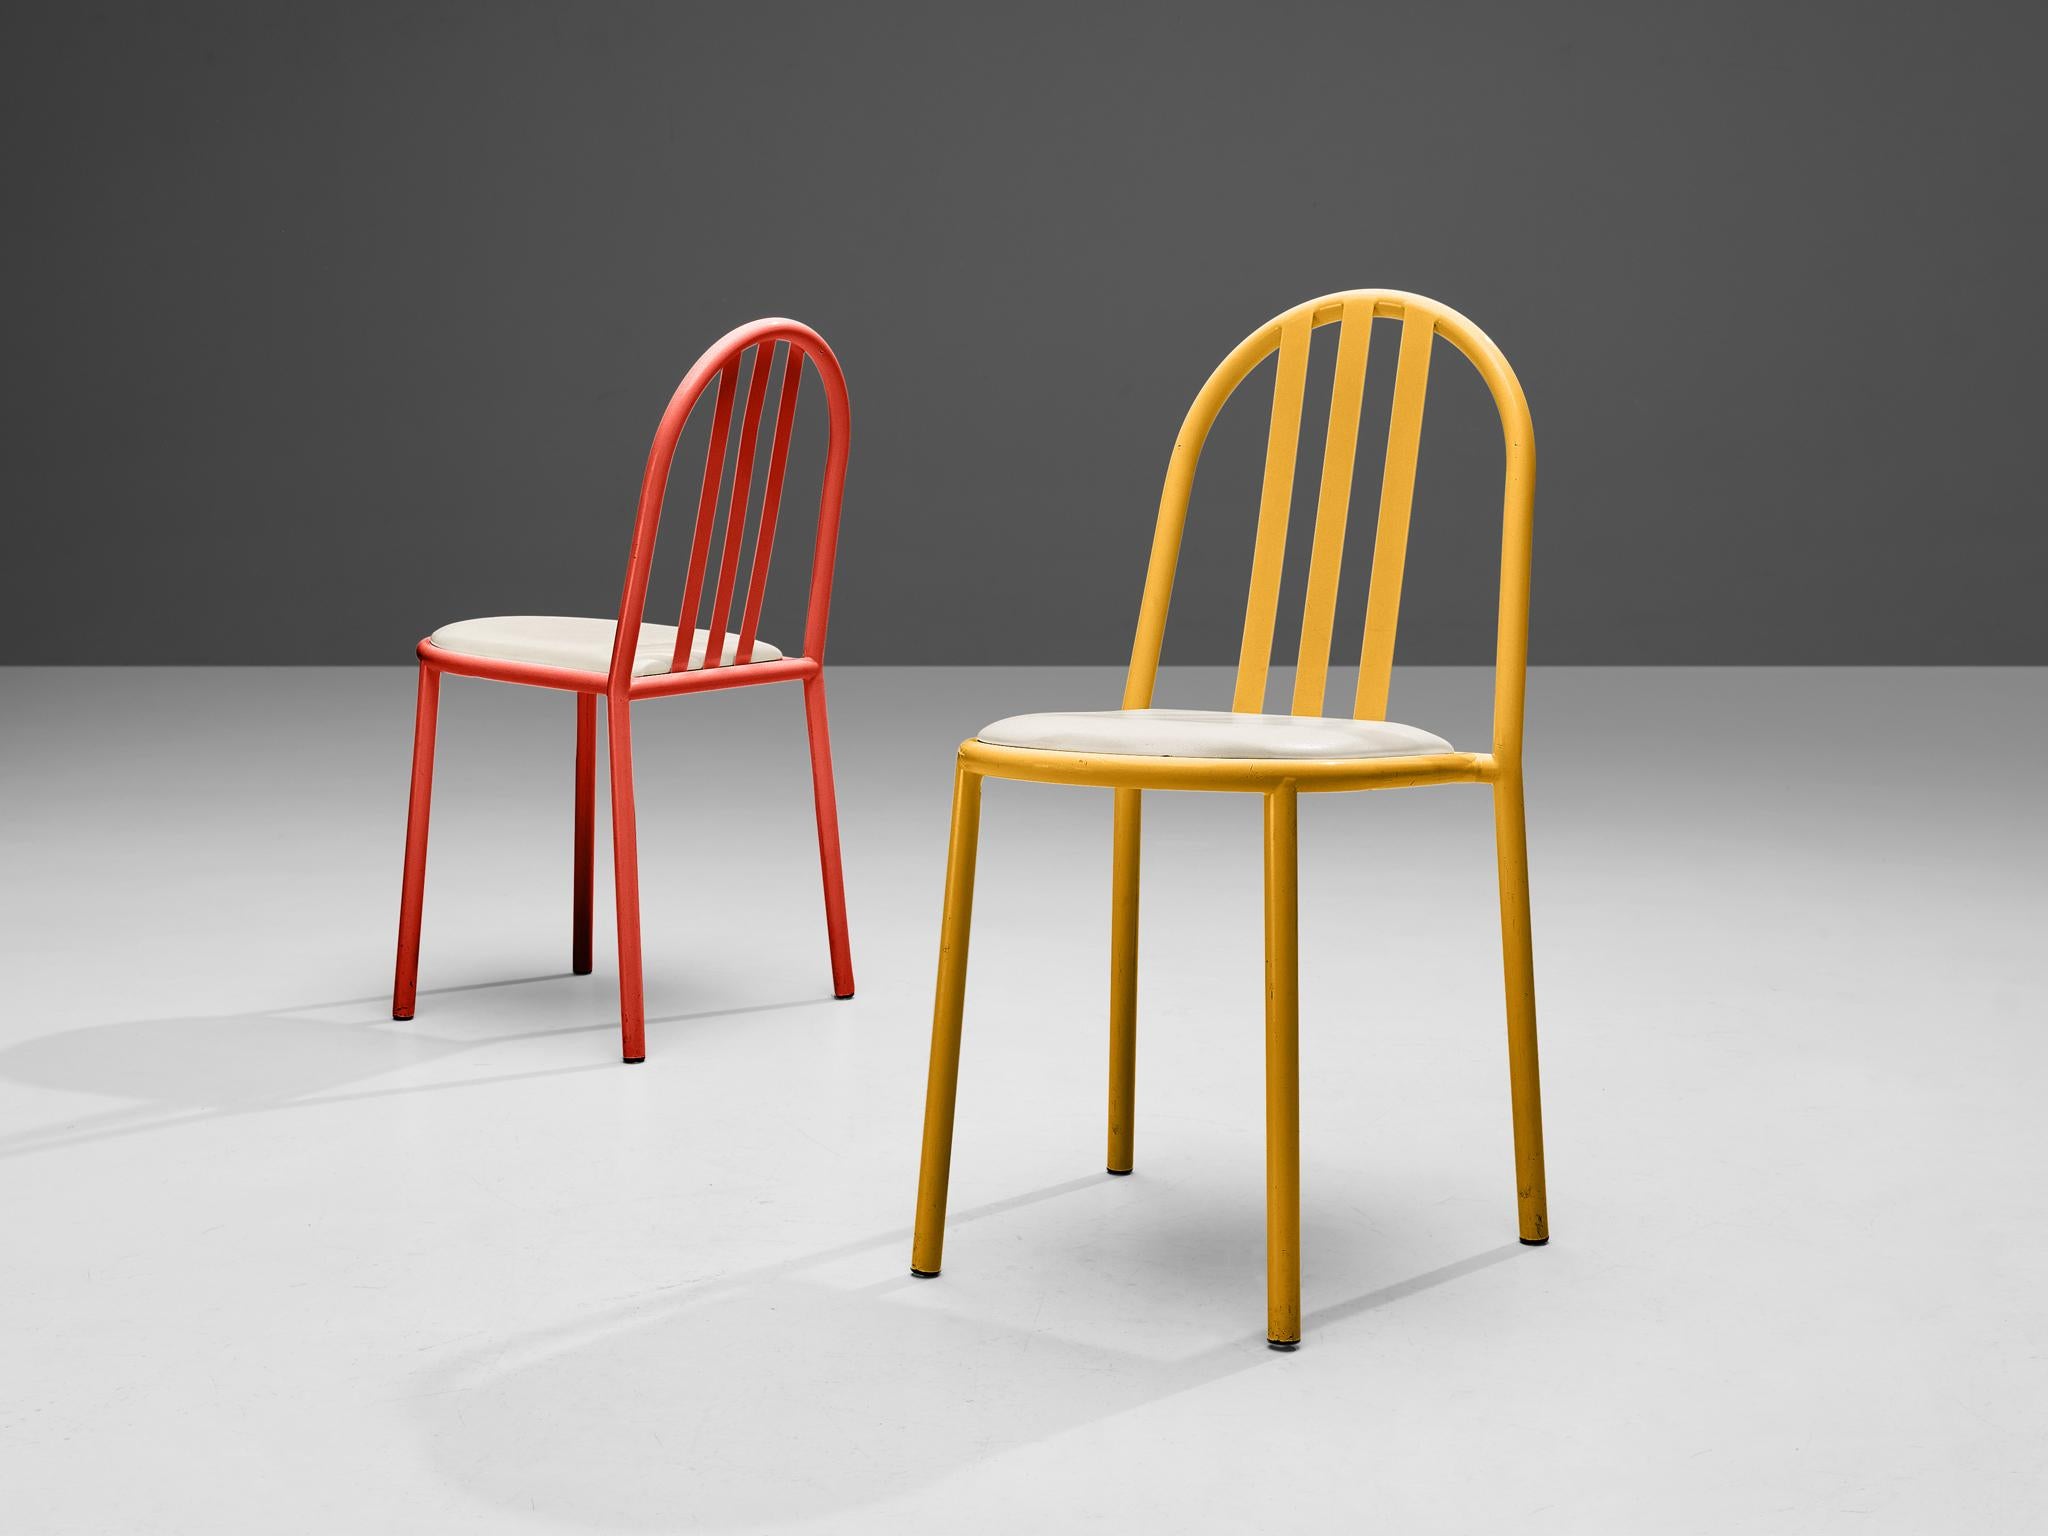 Robert Mallet-Stevens Dining Chairs Model 222 in Colourful Metal In Good Condition For Sale In Waalwijk, NL